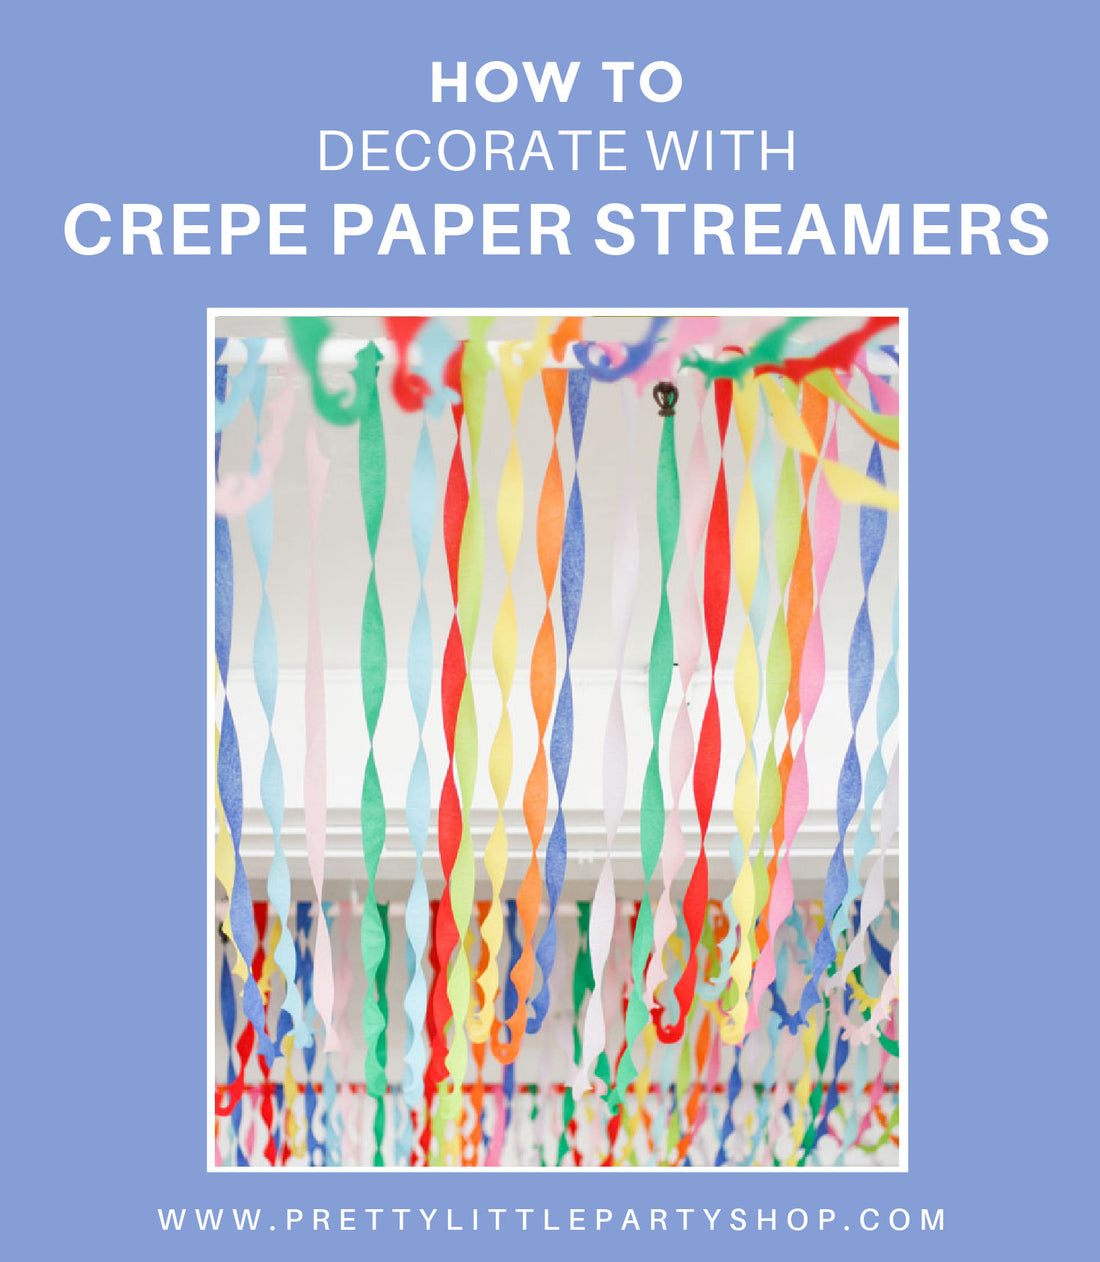 How To Decorate with Paper Streamers - A guide on Using Crepe Streamers to decorate large spaces